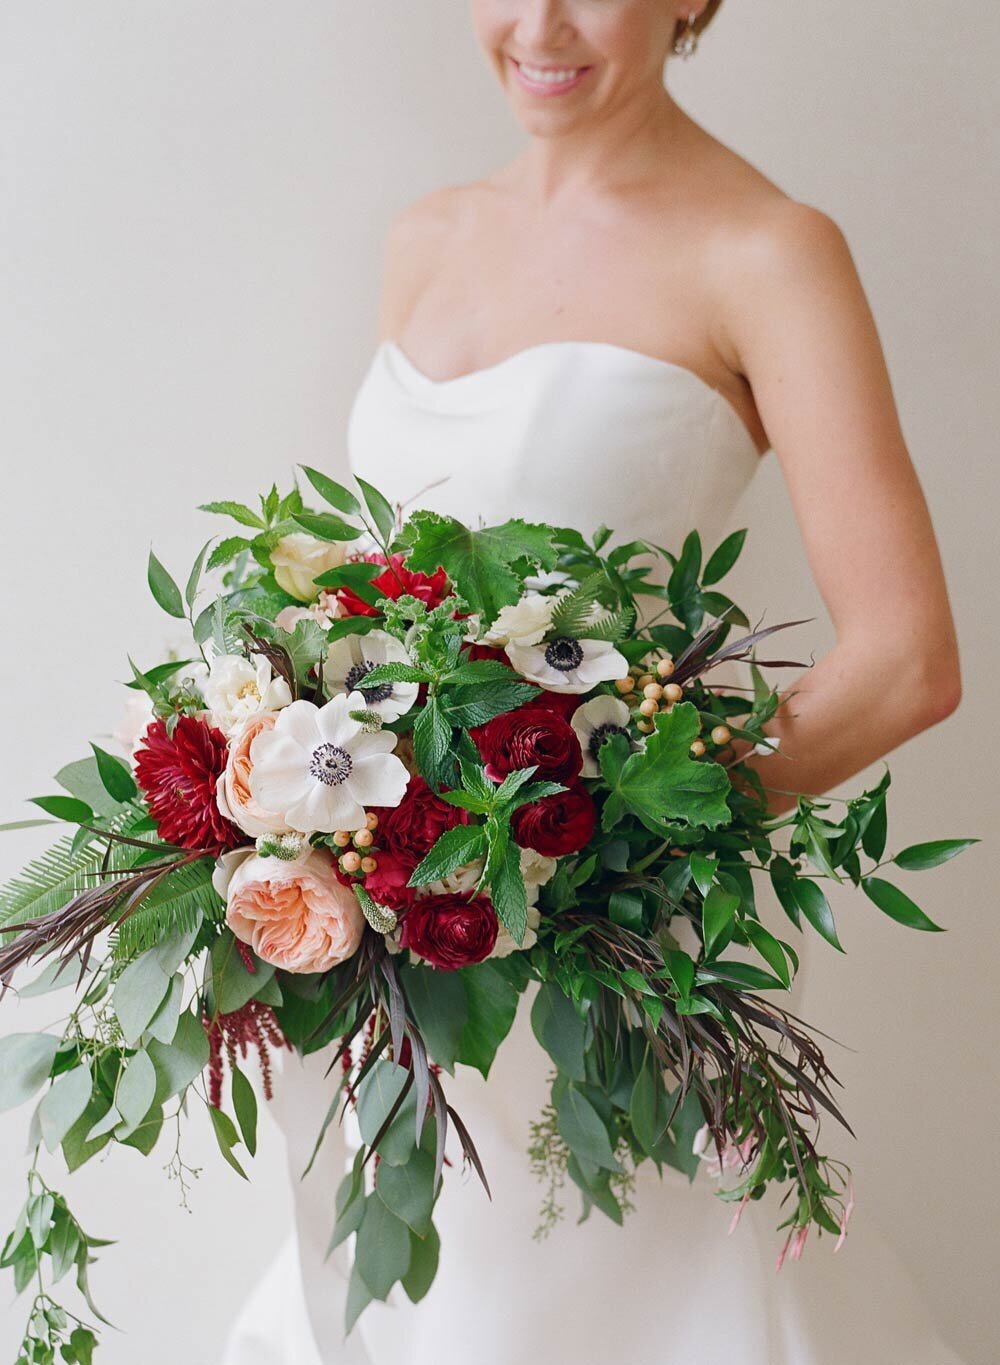 Bridal bouquet details with red, blush, and white flowers, and green leafy accents